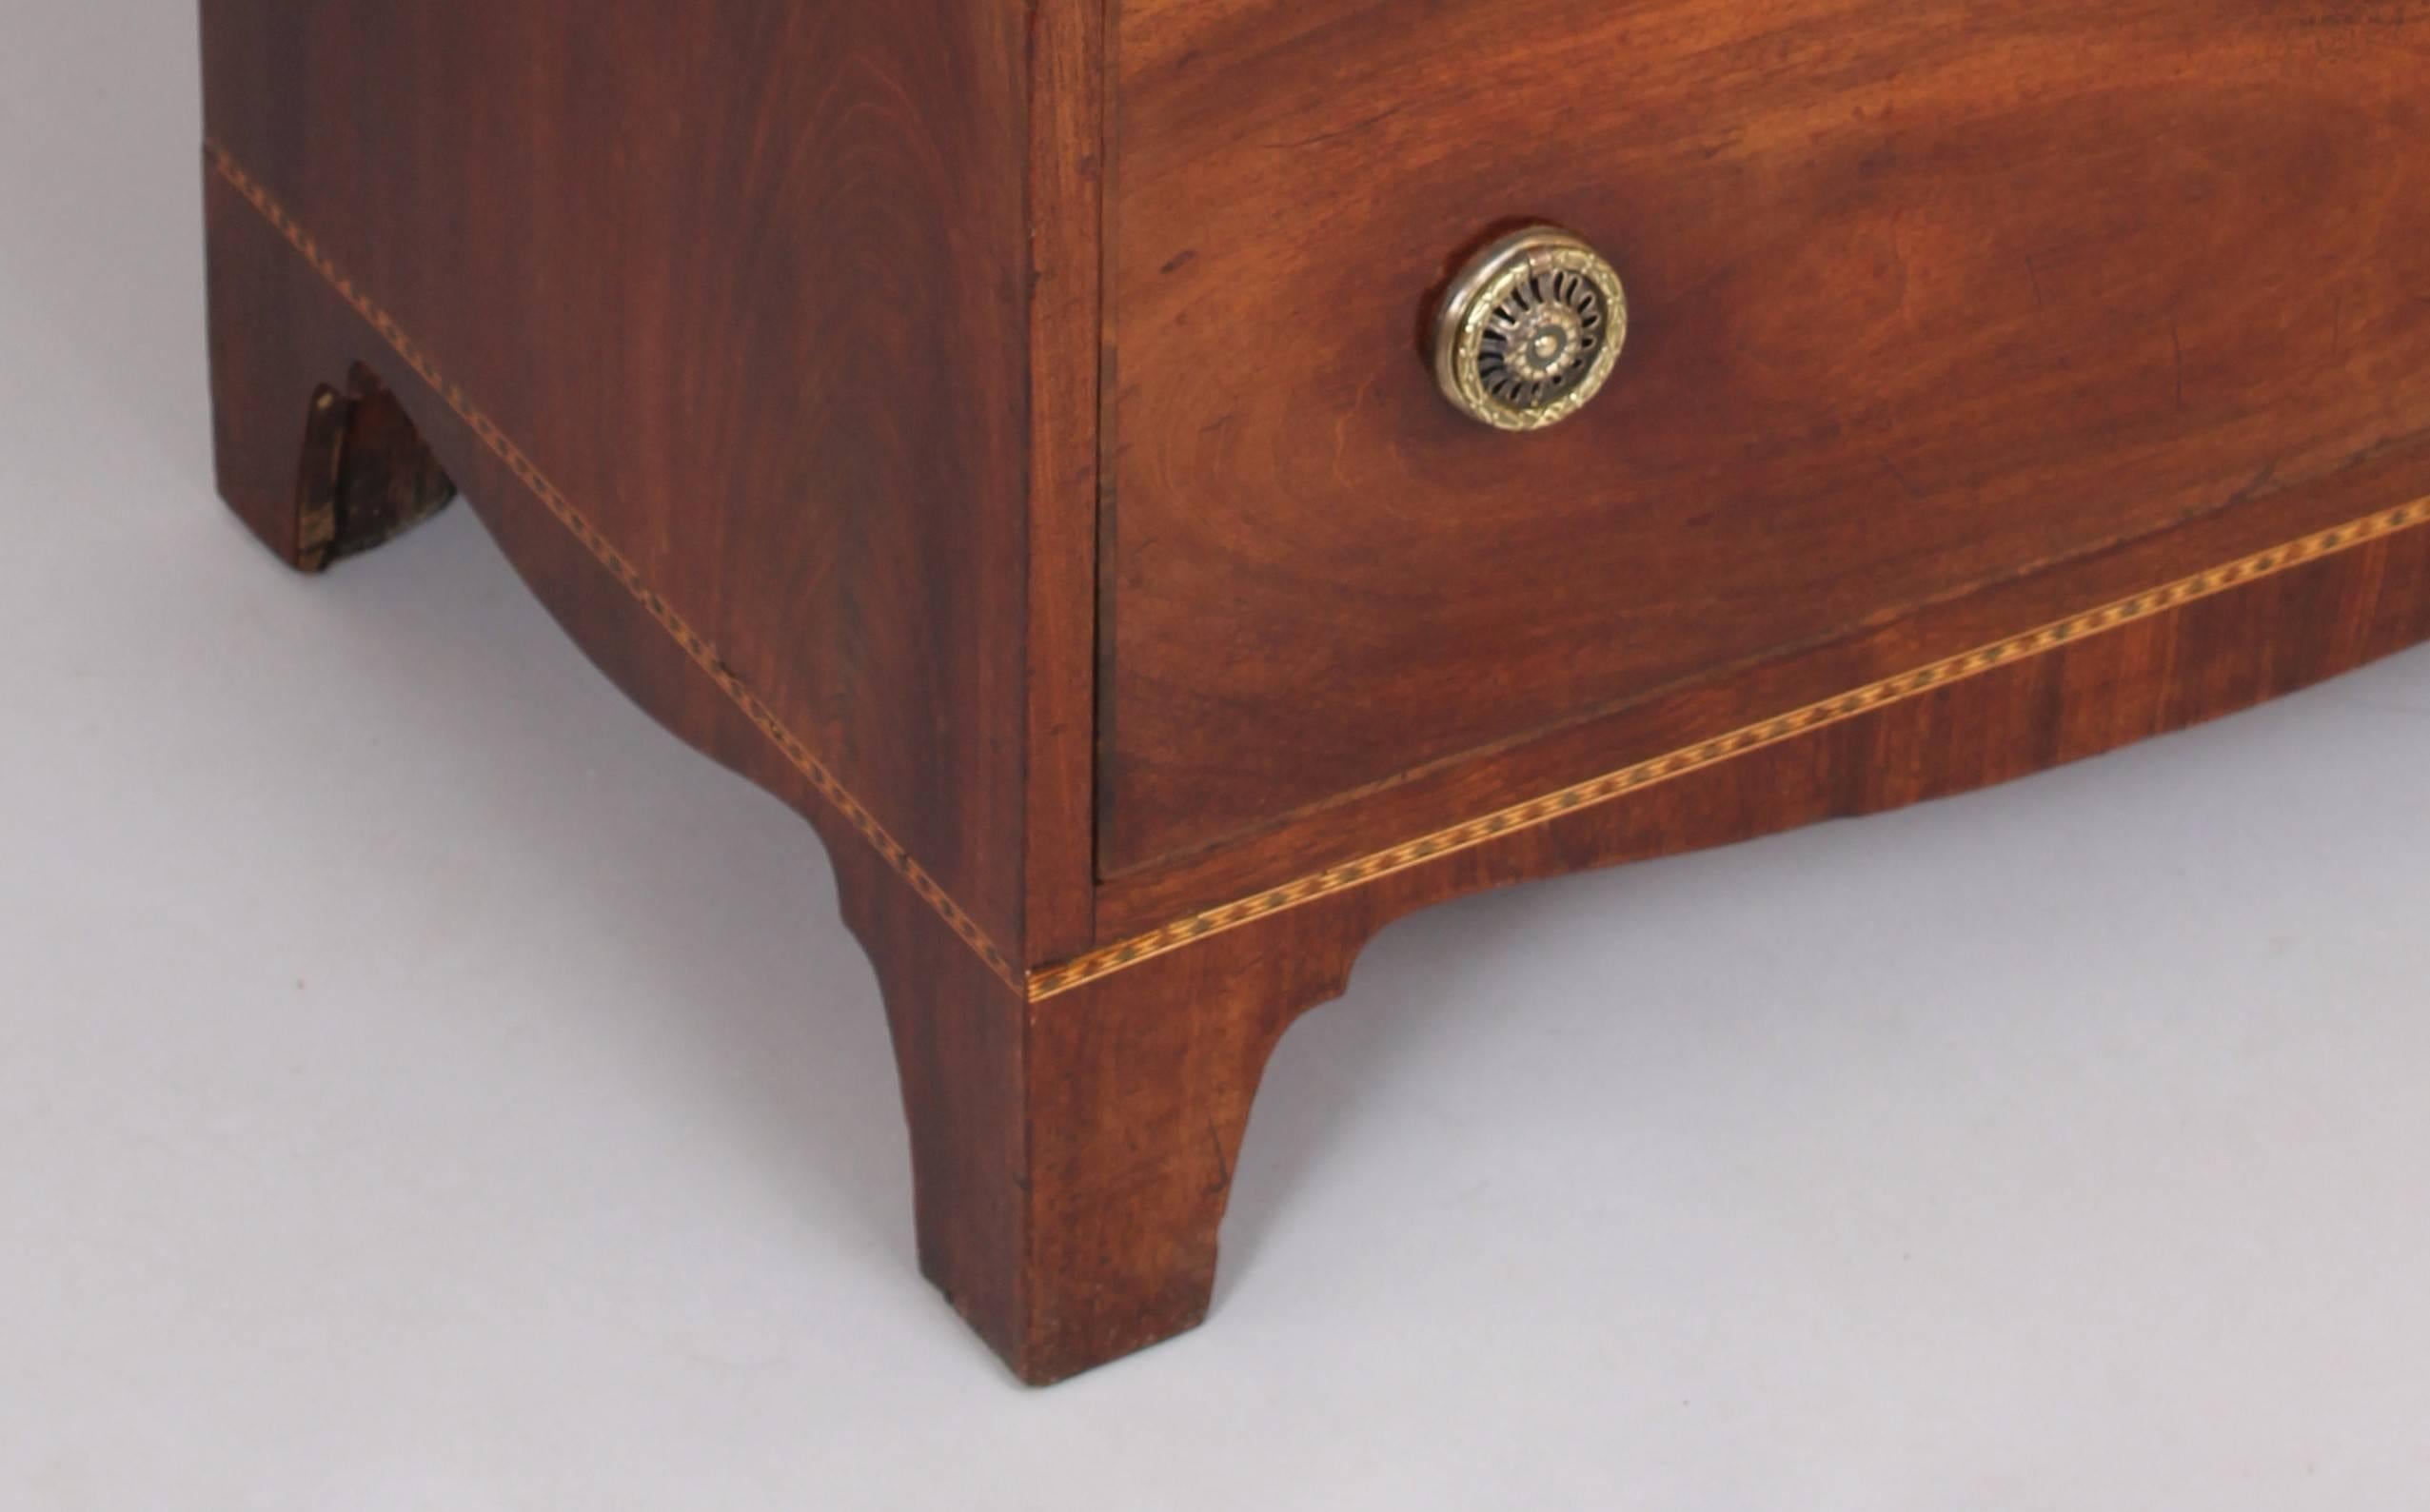 19th Century George III Period Mahogany Chest-of-drawers of Narrow Proportions